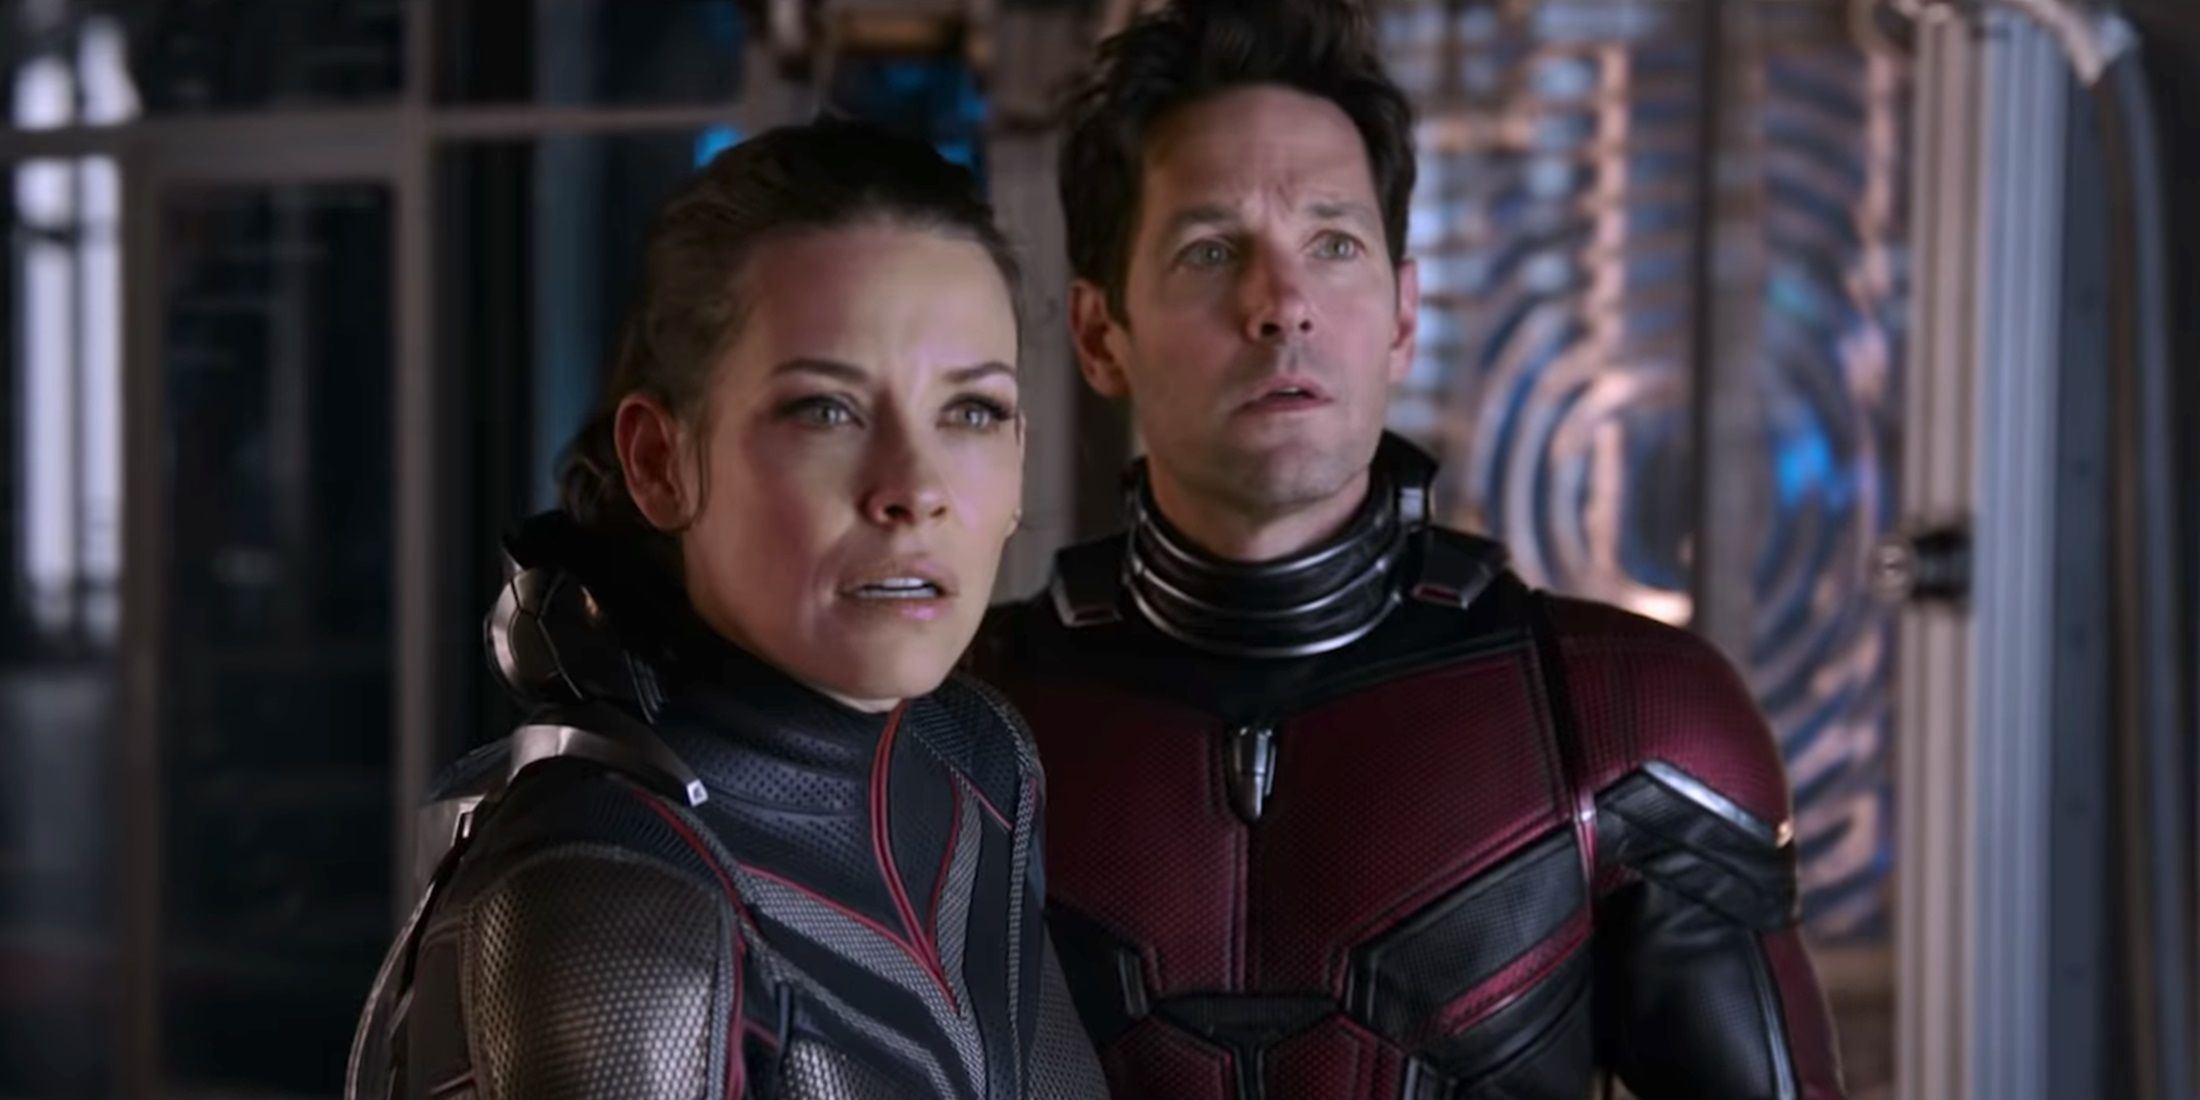 Paul Rudd and Evangeline Lilly in costume in Ant-Man and the Wasp